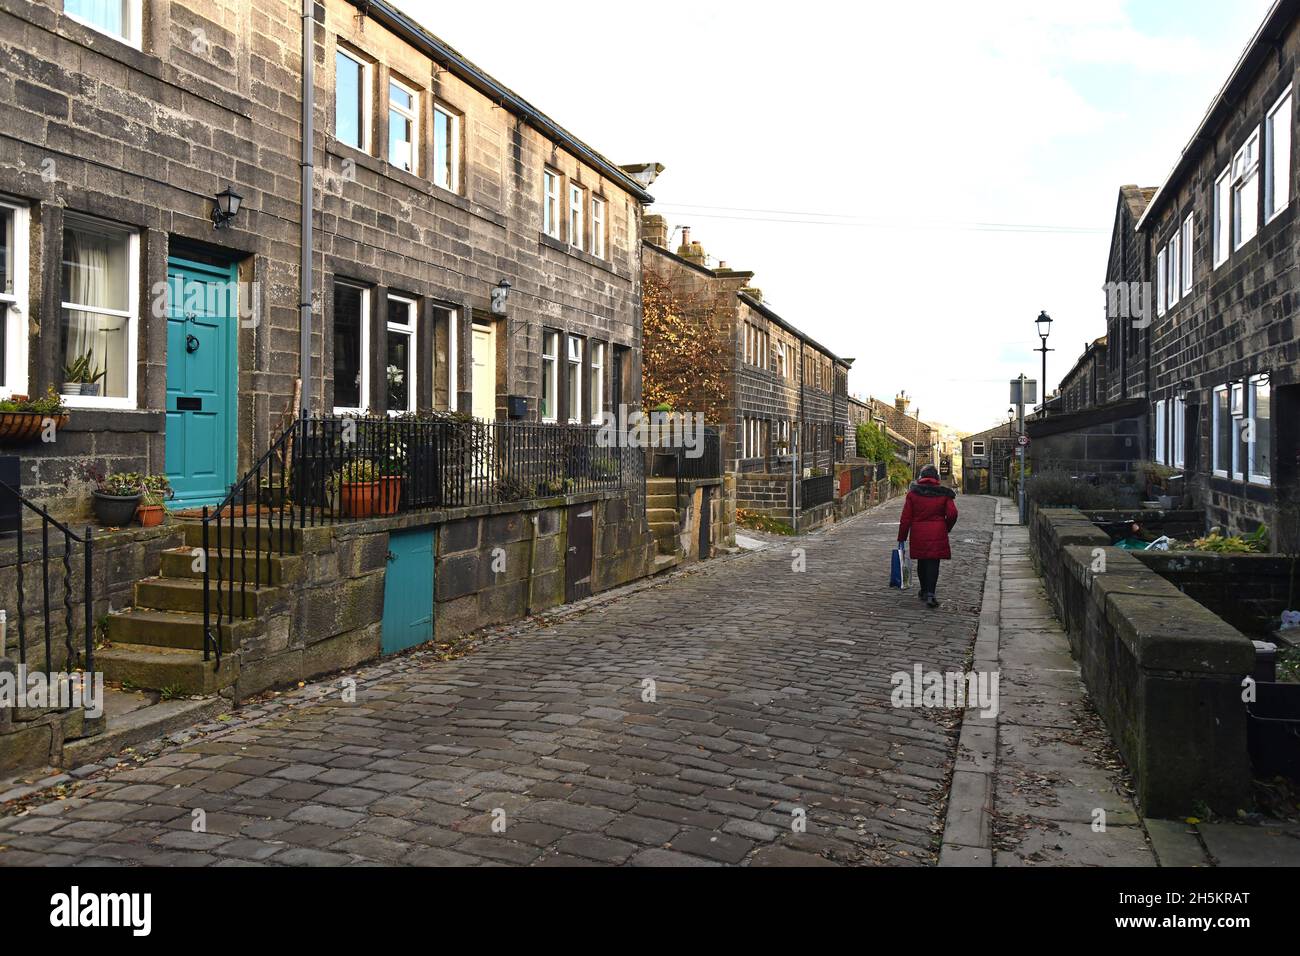 Car free village Heptonstall village in the Calderdale borough of West Yorkshire, England, Residents are not allowed to park their cars on the cobbled Stock Photo